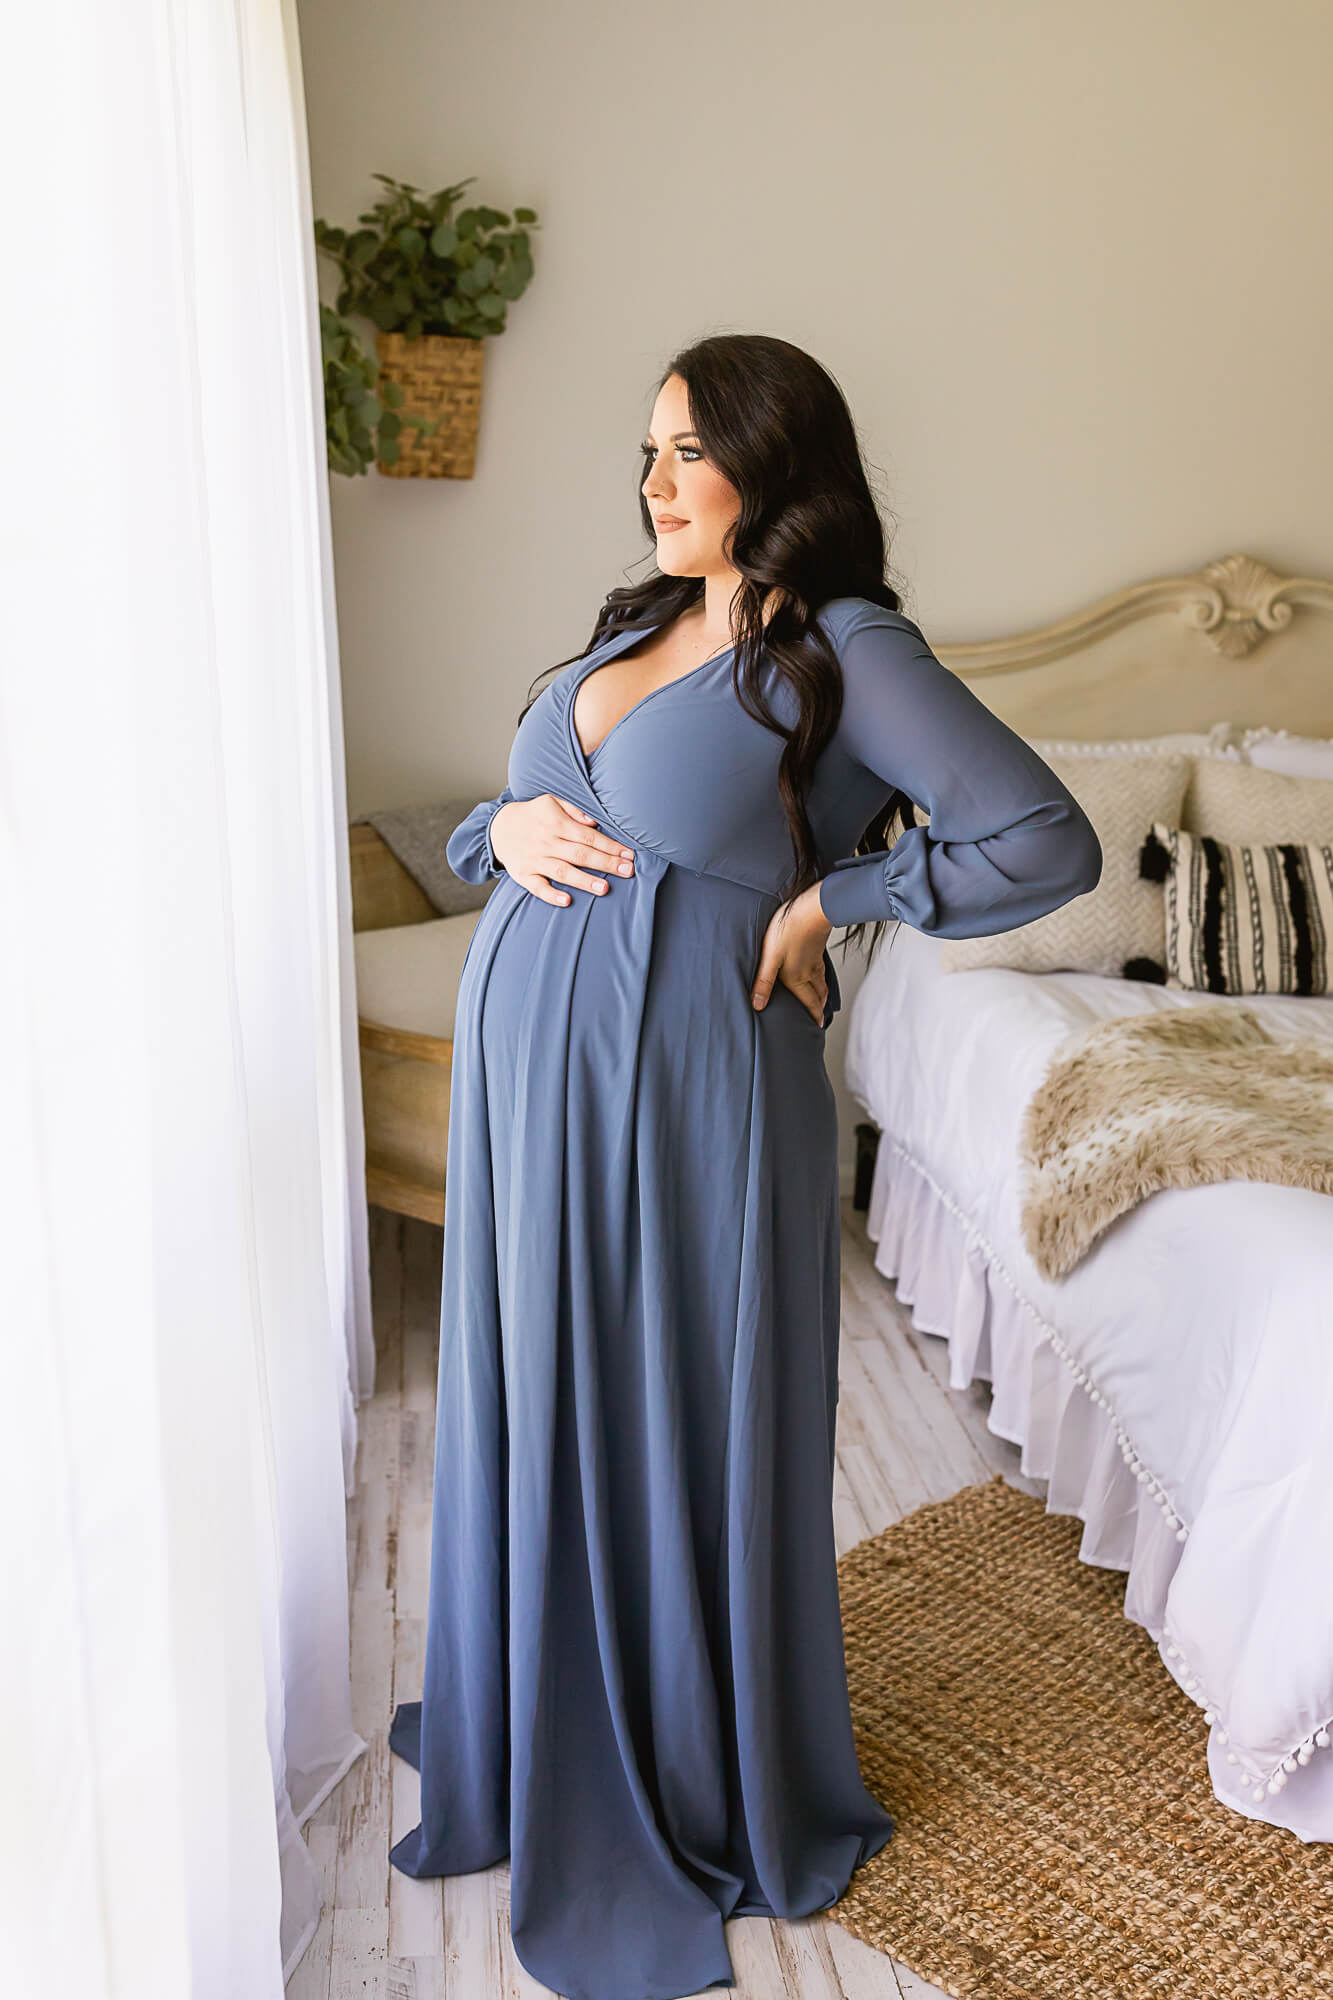 Expectant mom in blue gown holding her bump and looking out the window Birmingham Doula